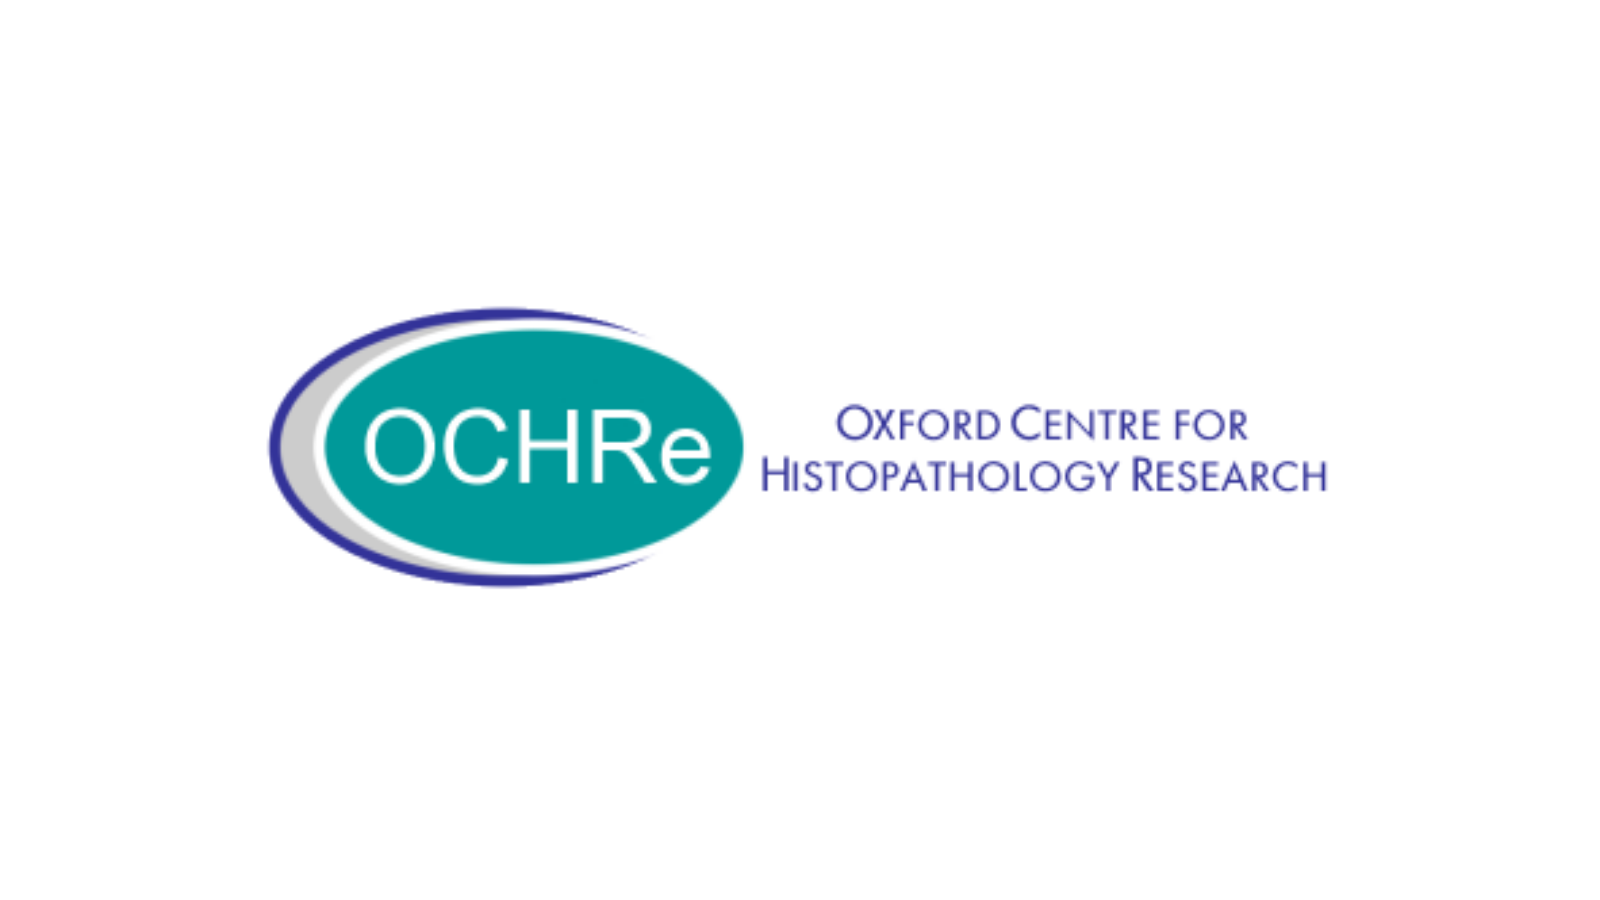 Oxford Centre for Histopathology Research (OCHRe) logo.